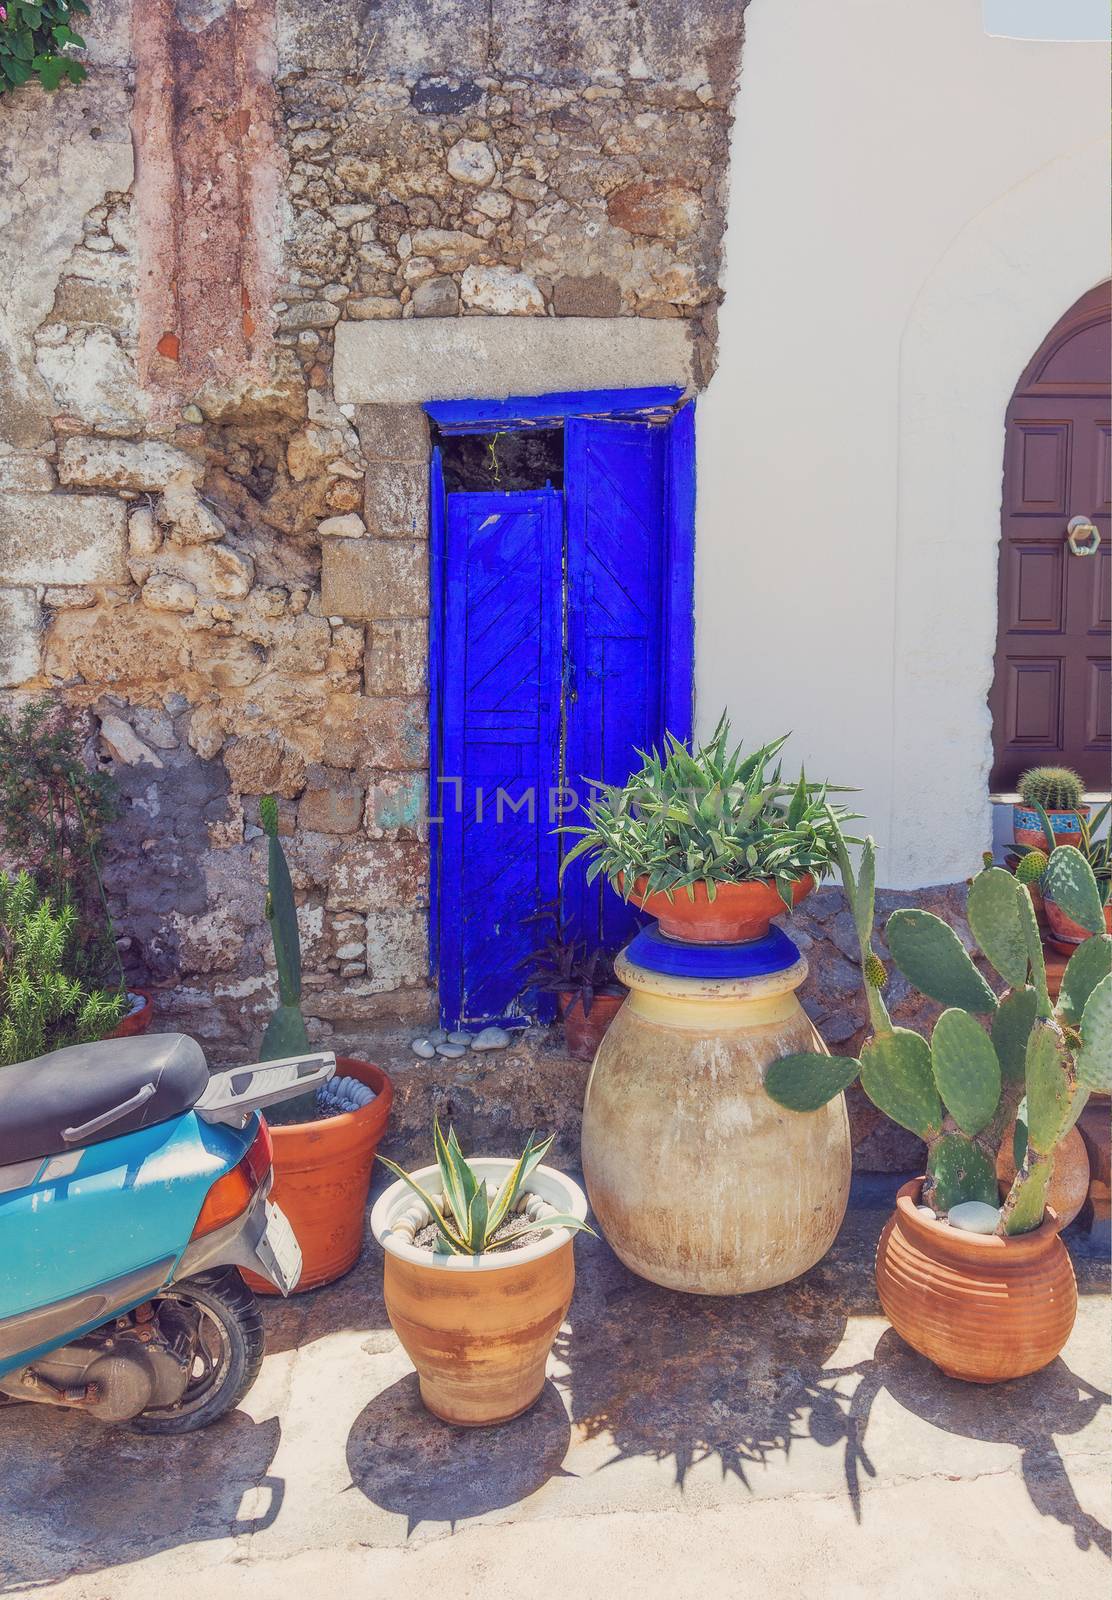 antique door in the colorful  village Koskinou on the island of Rhodes, Greece